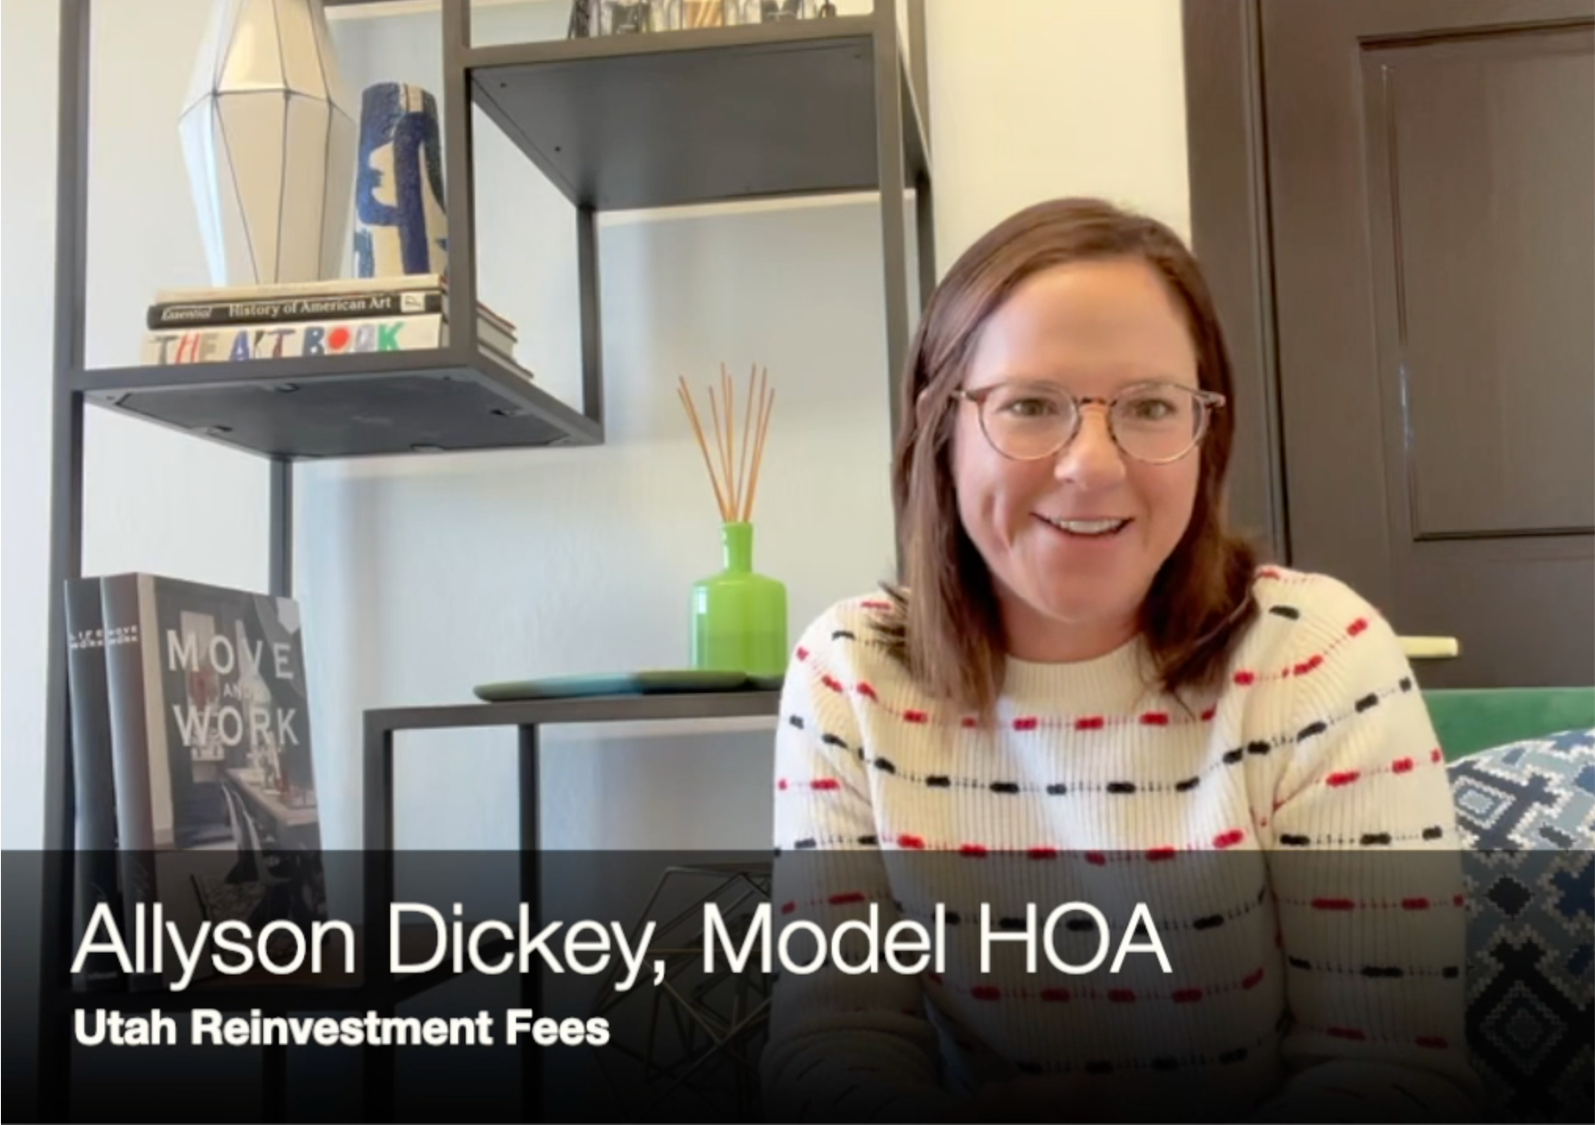 HOA reinvestment fees – the gift that keeps on giving